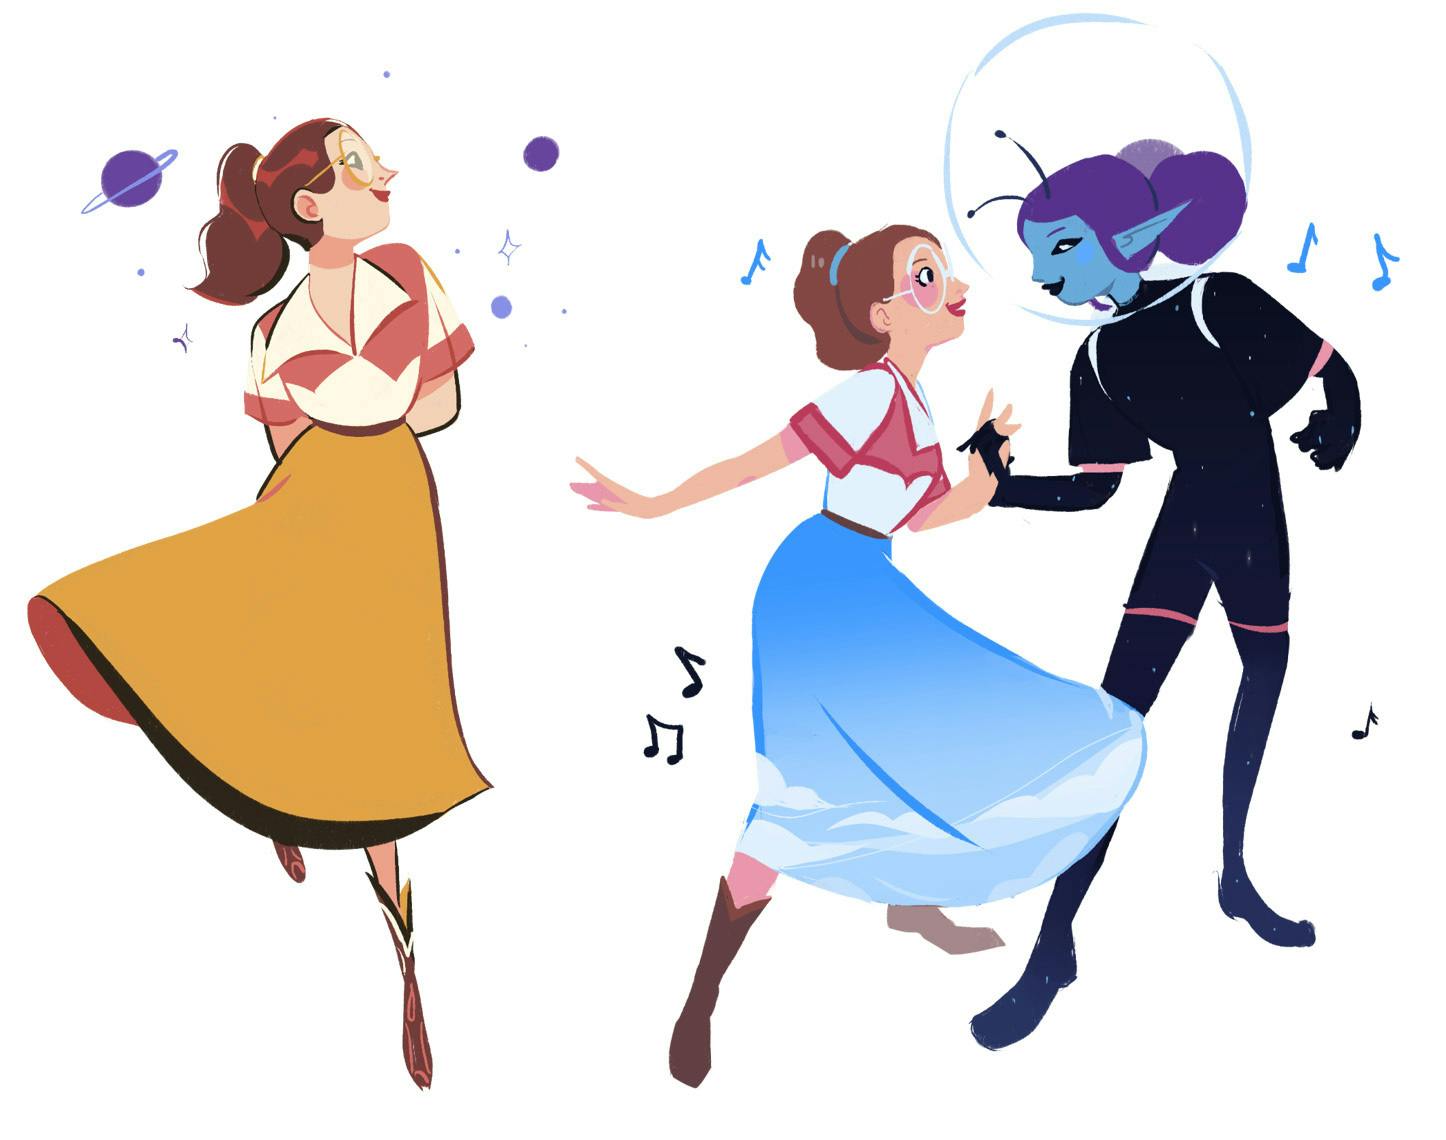 Animation drawing of a women and alien characters dancing.